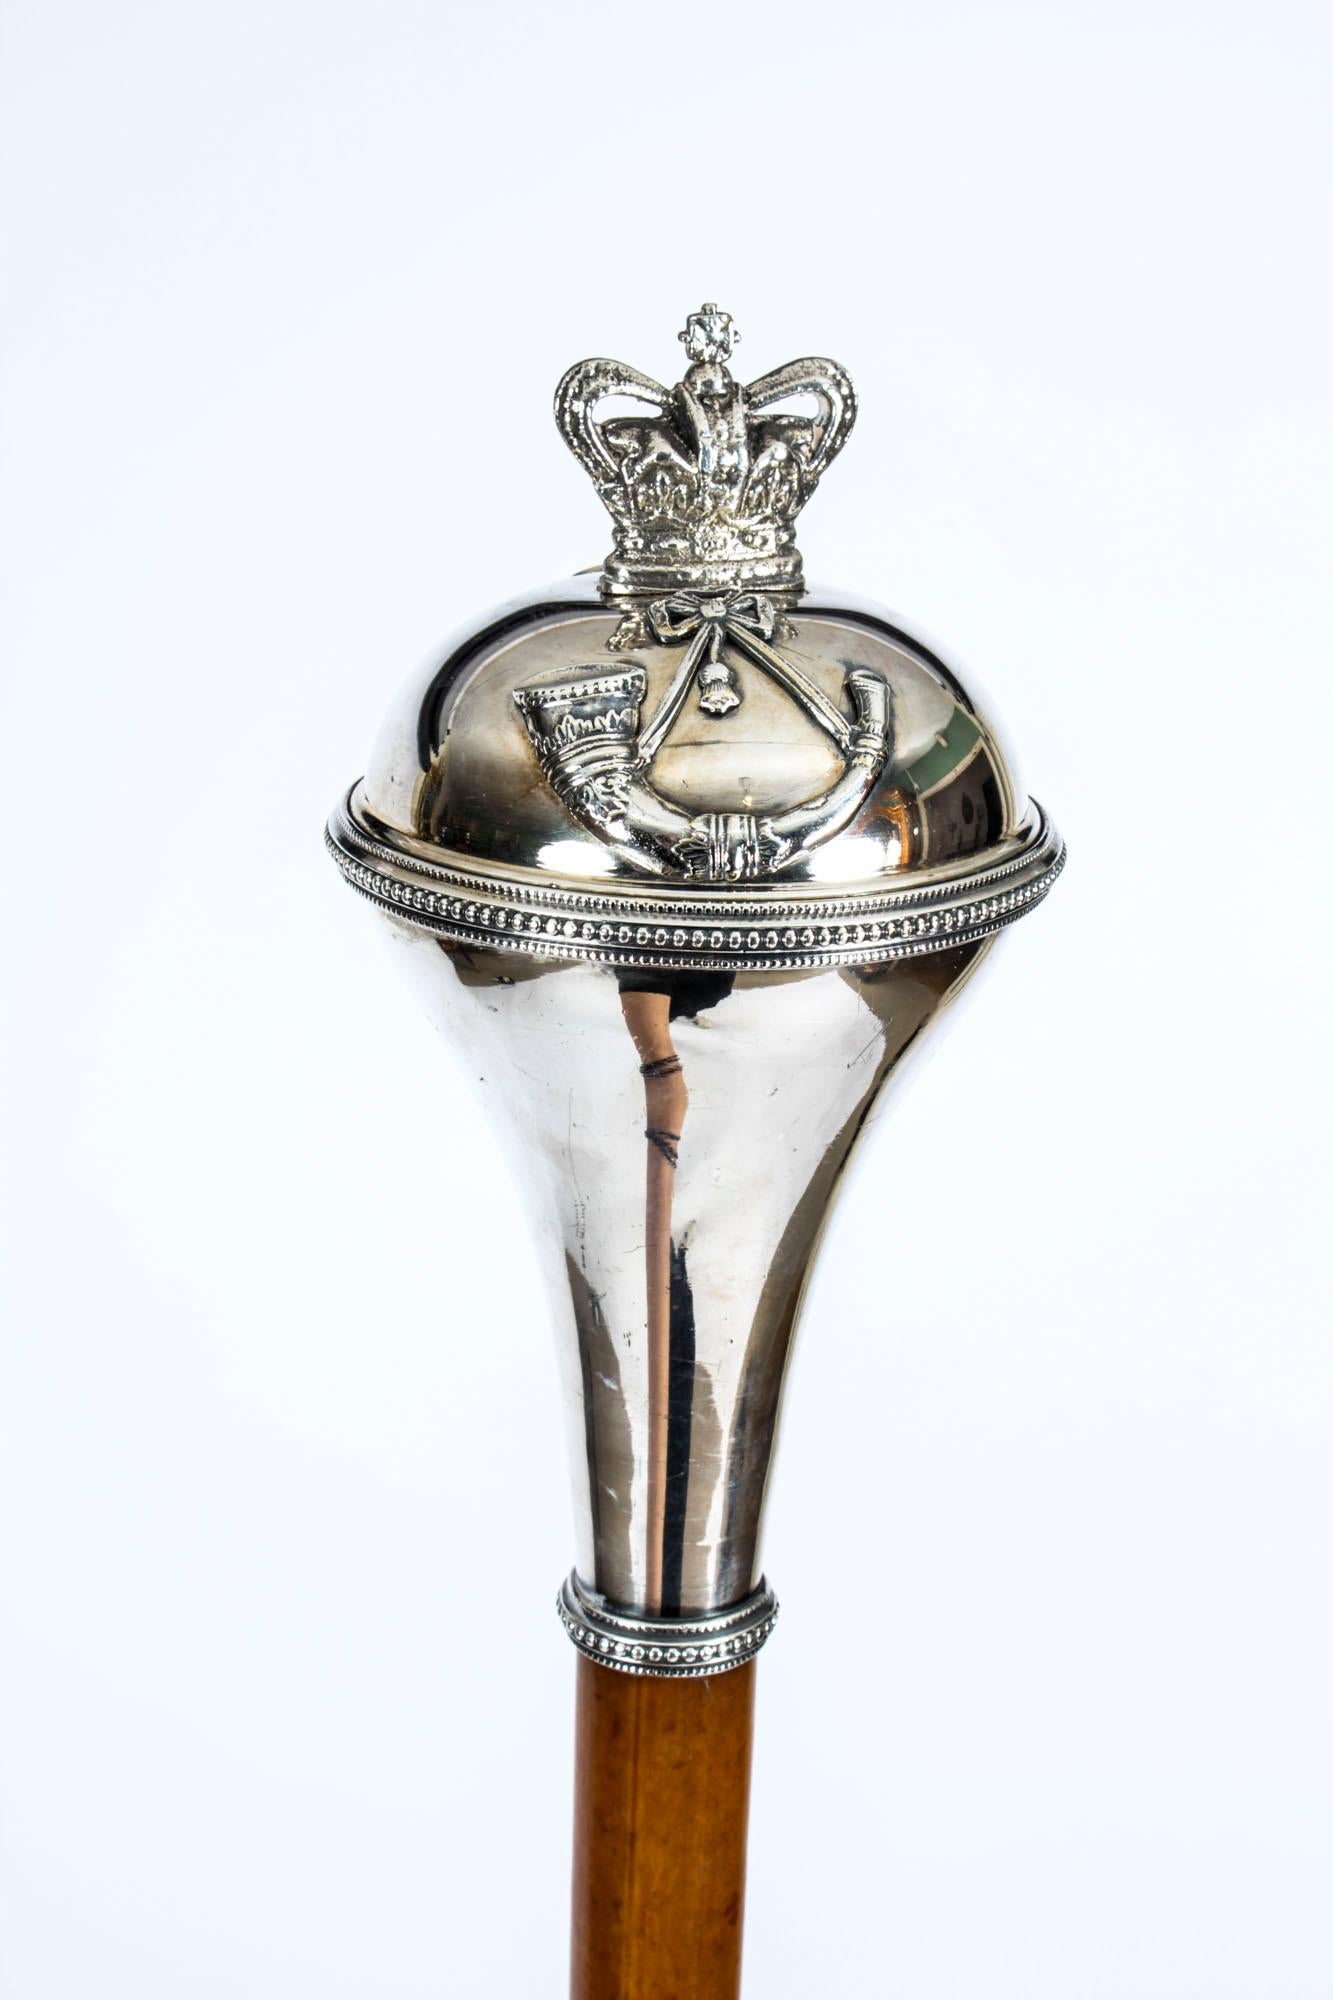 This is a superb Victorian rare silver-plated Malacca Drum Majors Pattern Band Mace, circa 1880 in date.

The mace features large ball top incorporating the pre 1902 crown, bugle horn and number '68', indicating the 1st Battalion, The Durham Light